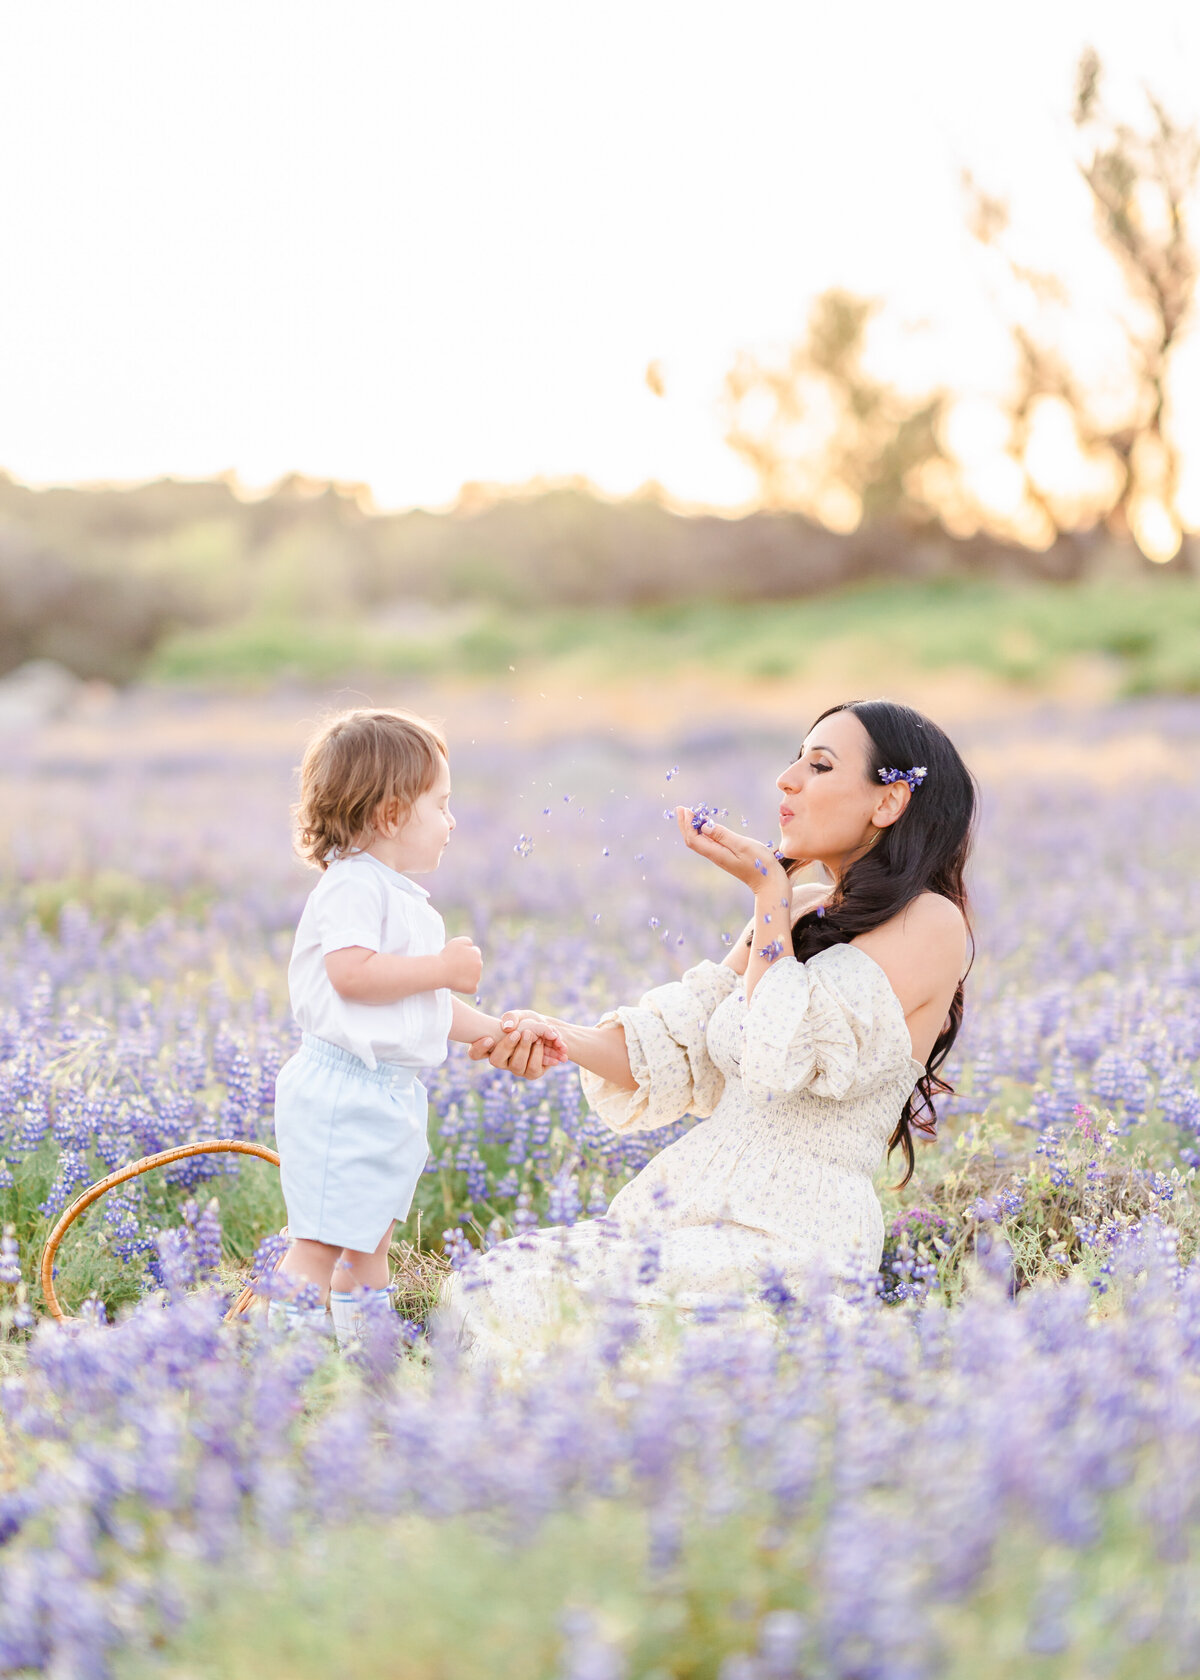 A mother kneels in a field of purple lupines blowing flower petals at her son who is standing holding her hand photographed by bay area photographer, Light Livin Photography.